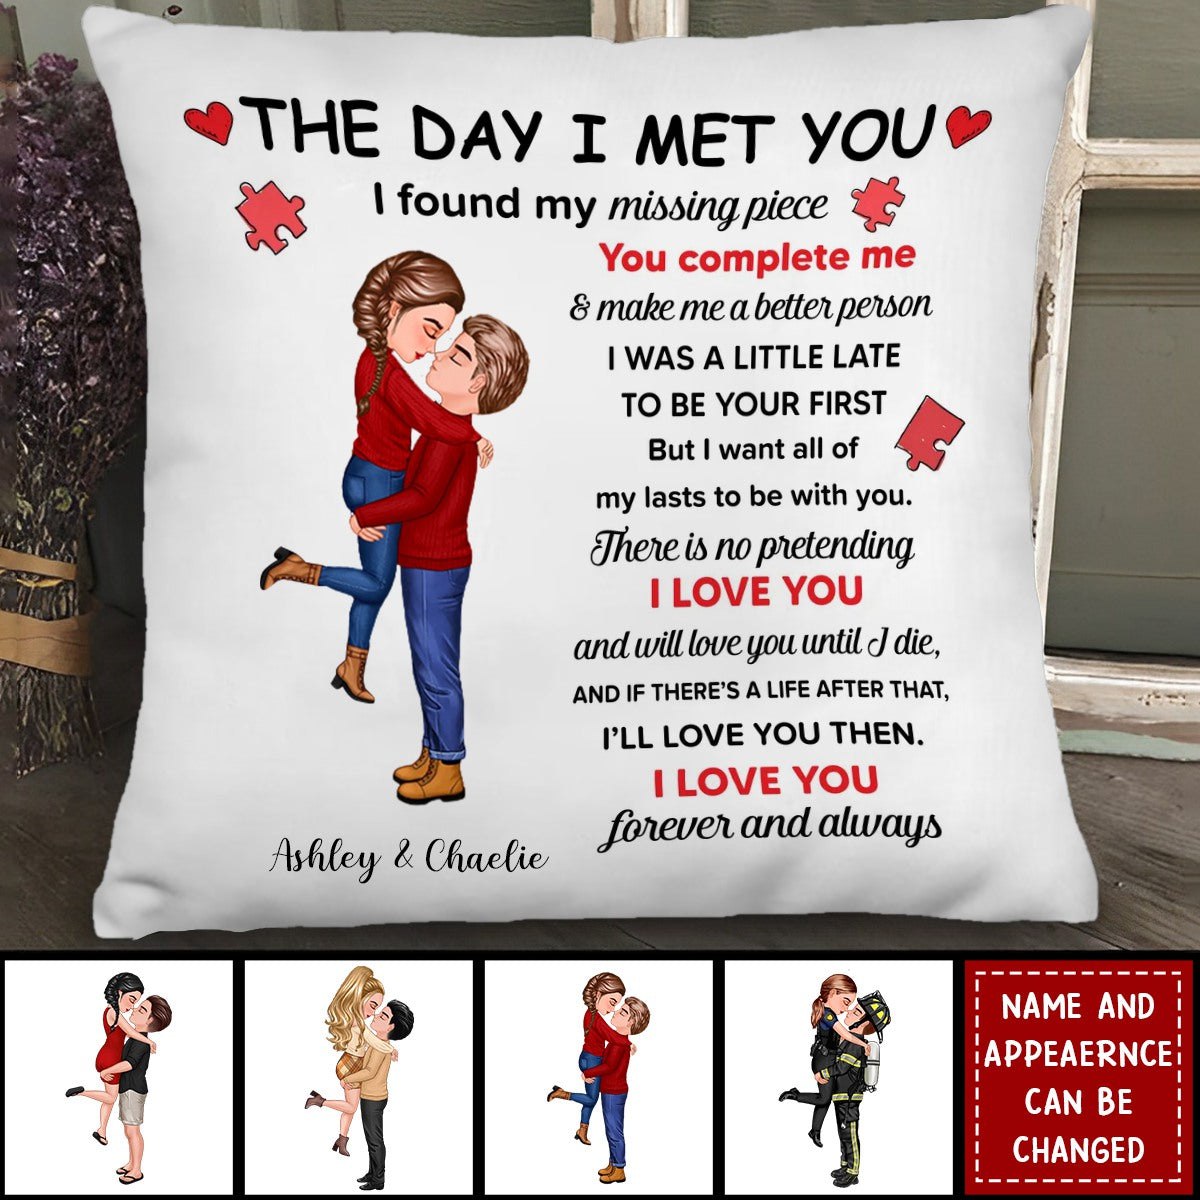 Found My Missing Piece Couple Hugging Kissing Gift by Occupation Gift For Her Gift For Him Firefighter, Nurse, Police Officer Personalized Pillow